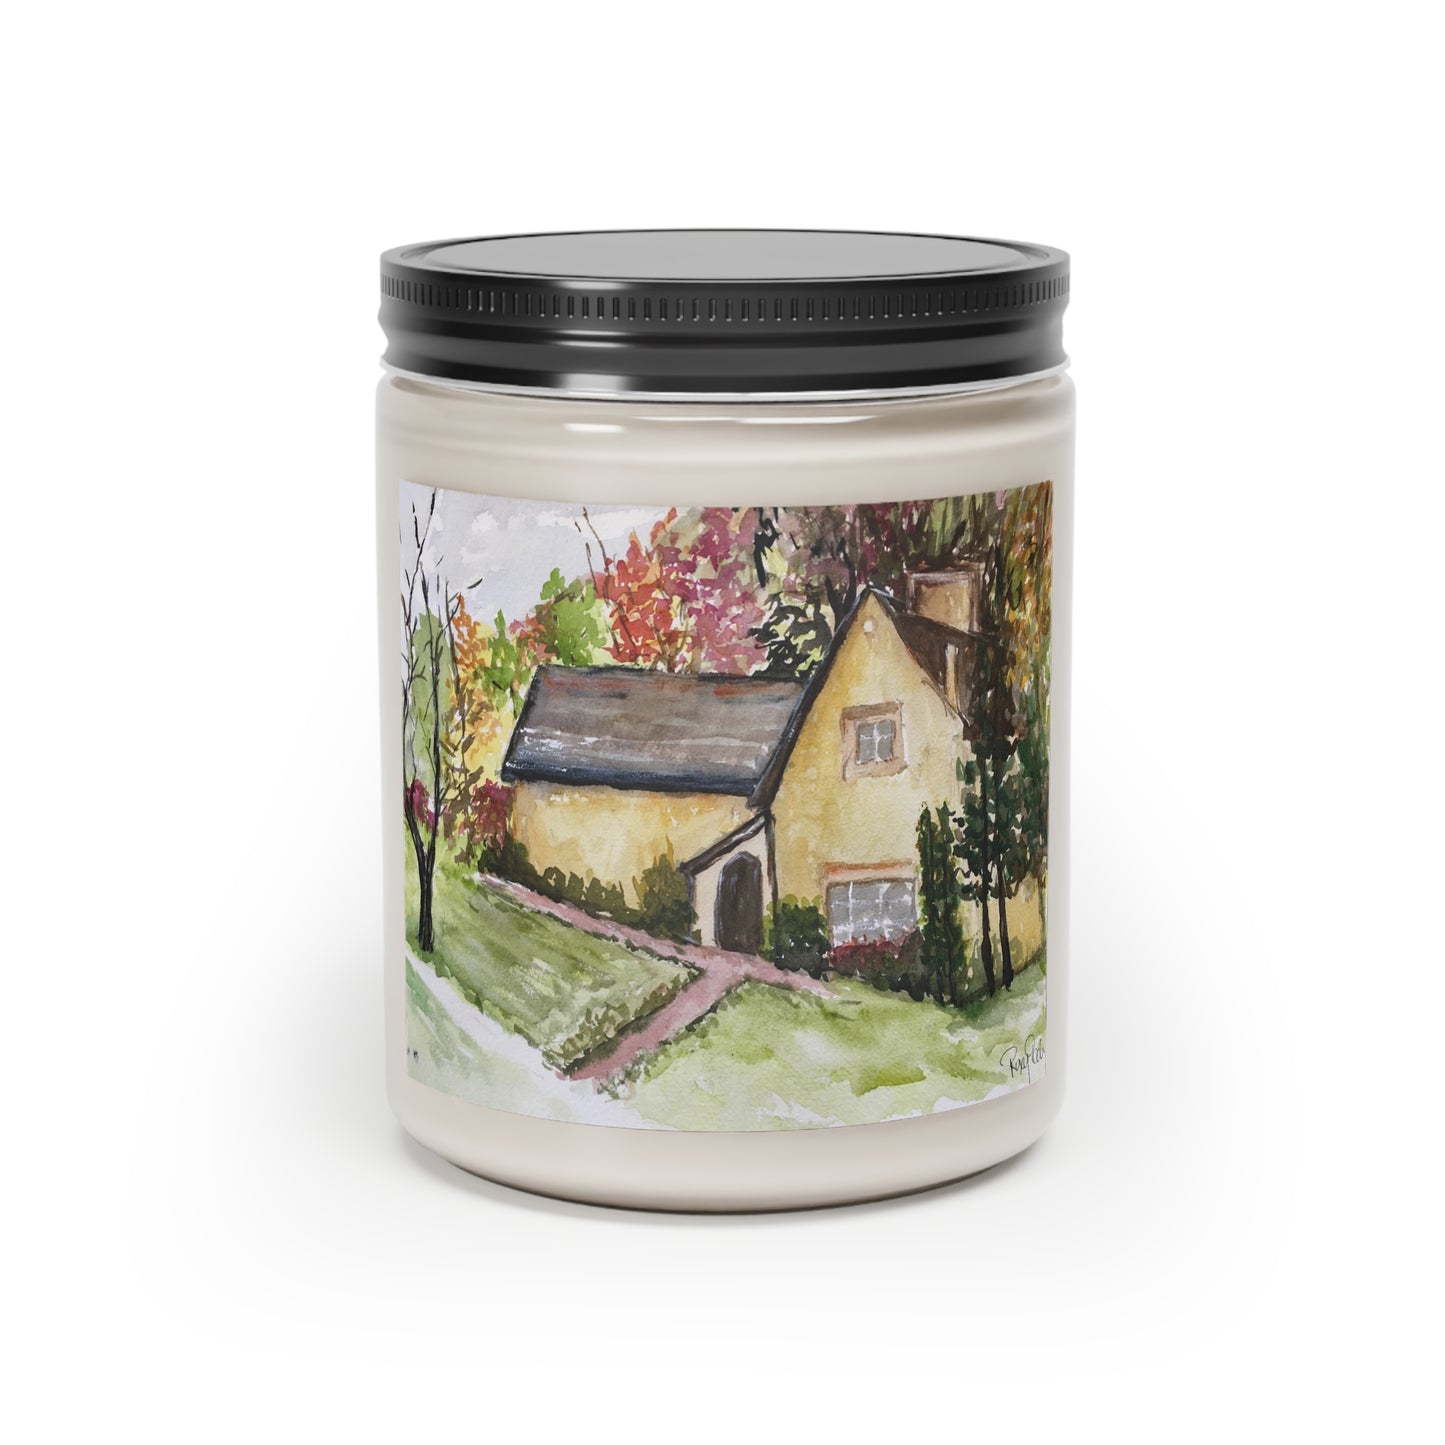 Woodwells at Owlpen Manor Cotswolds Candle